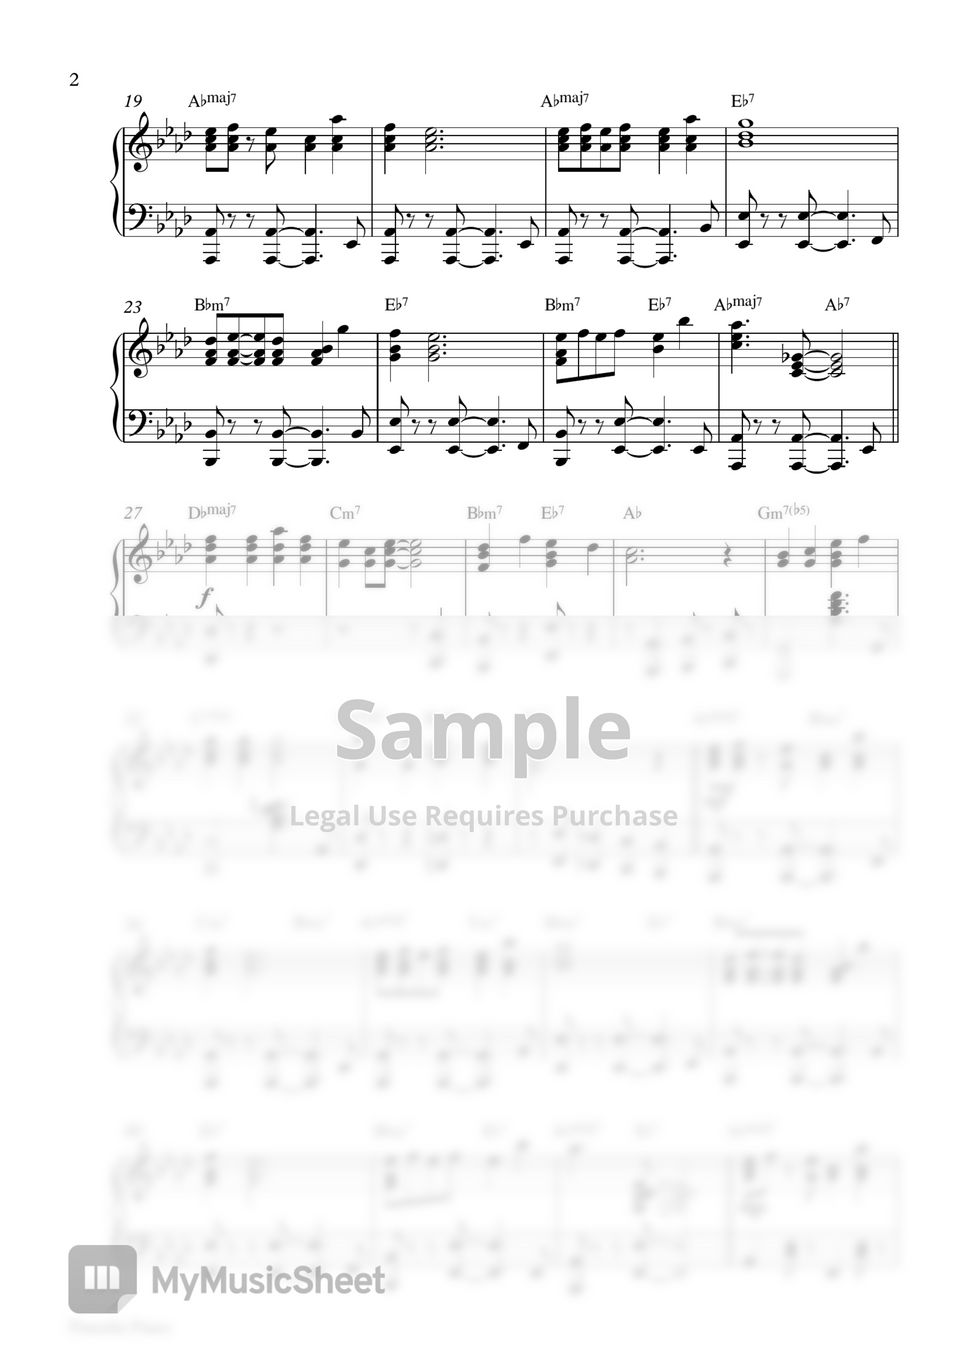 Christmas Song - Rudolph The Red Nosed Reindeer (Piano Sheet) by Pianella Piano